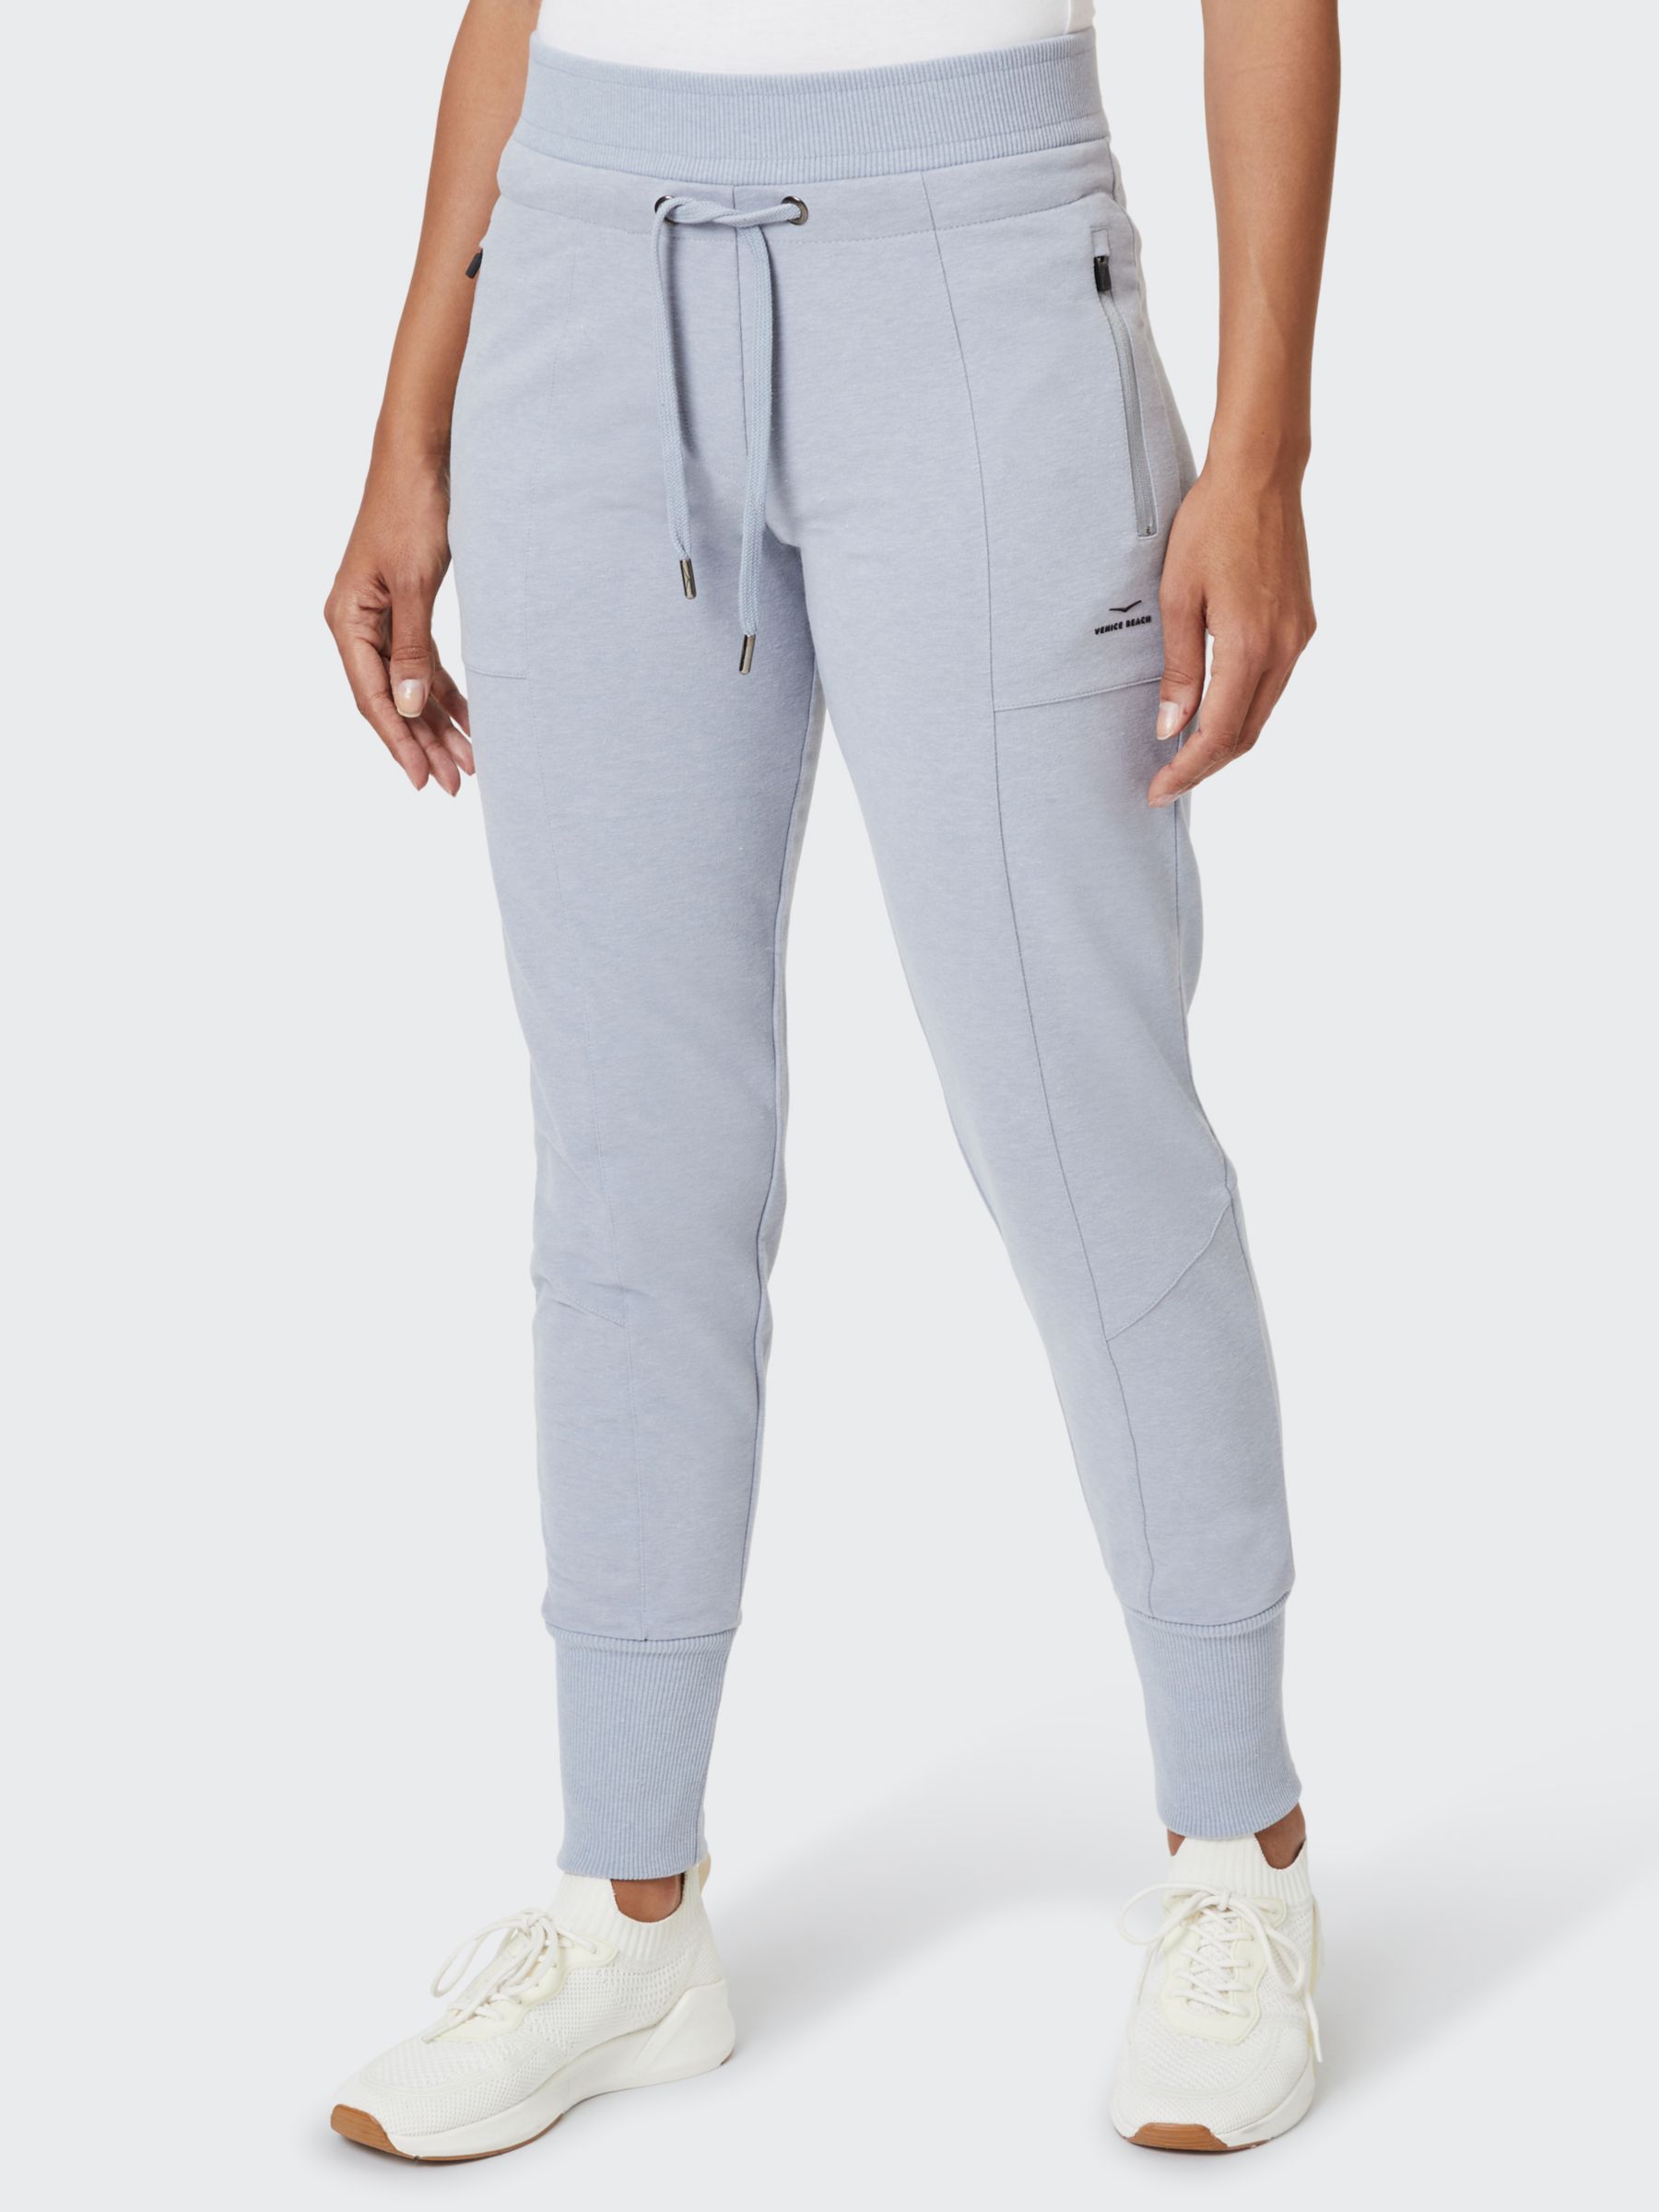 Venice Beach Isabelle Joggers, Soft Steel, XS